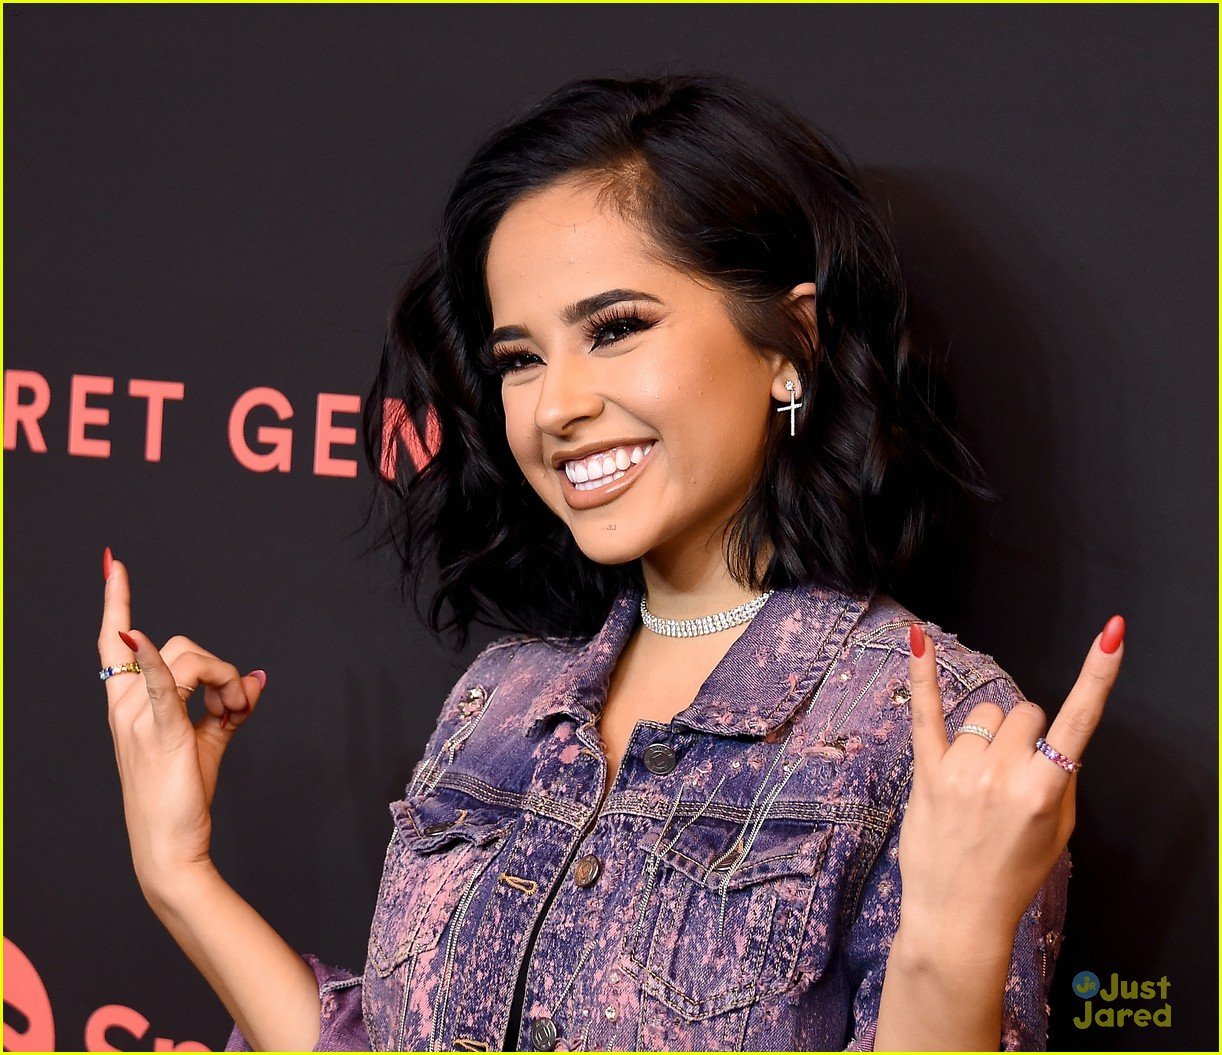 becky g spotify event country afraid 10